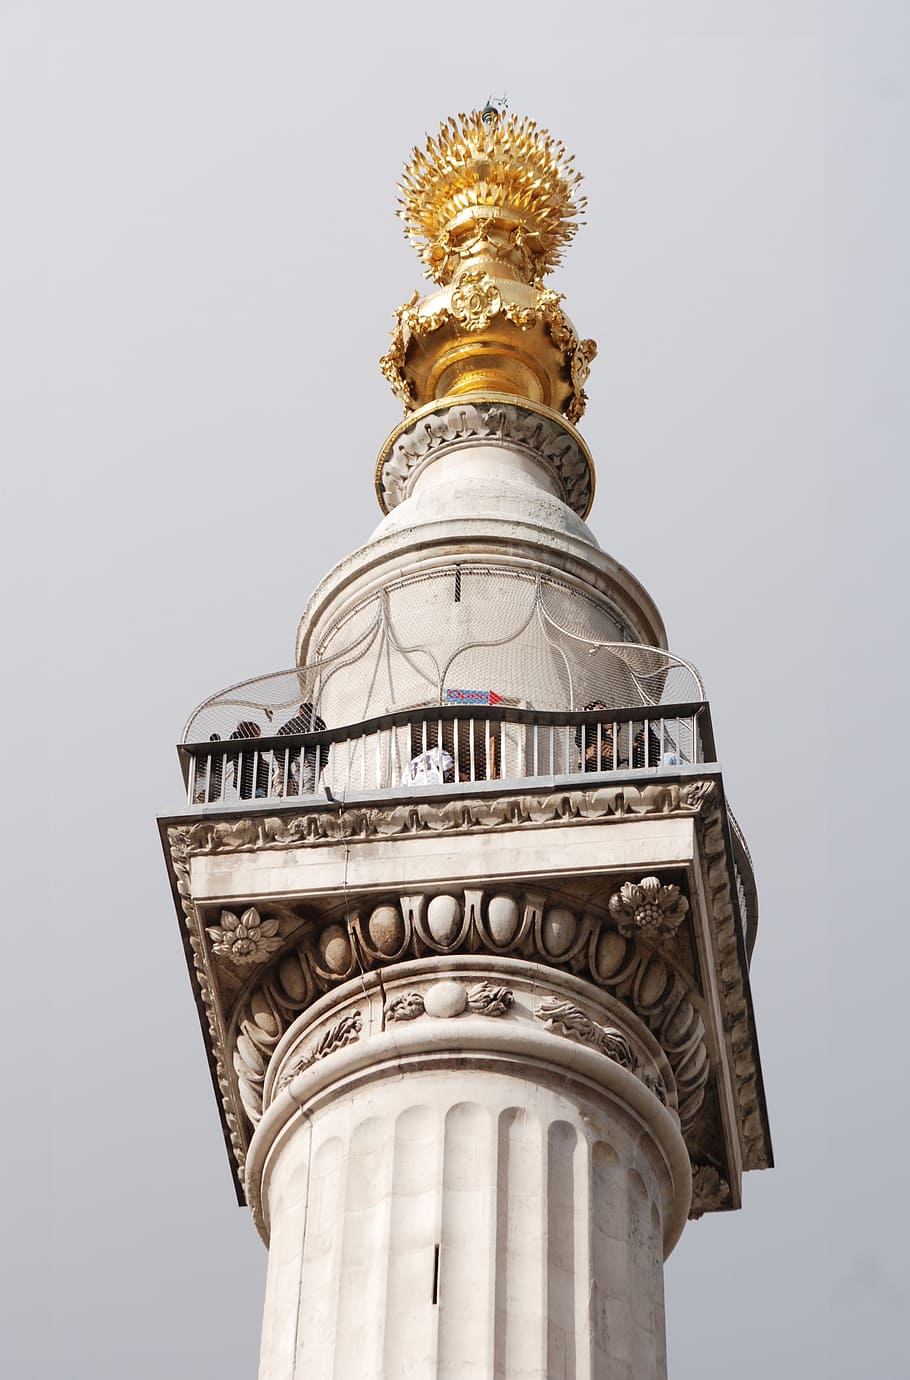 Monument, Great, Fire, London, great, fire, doric column, gold colored, statue, architecture, gold